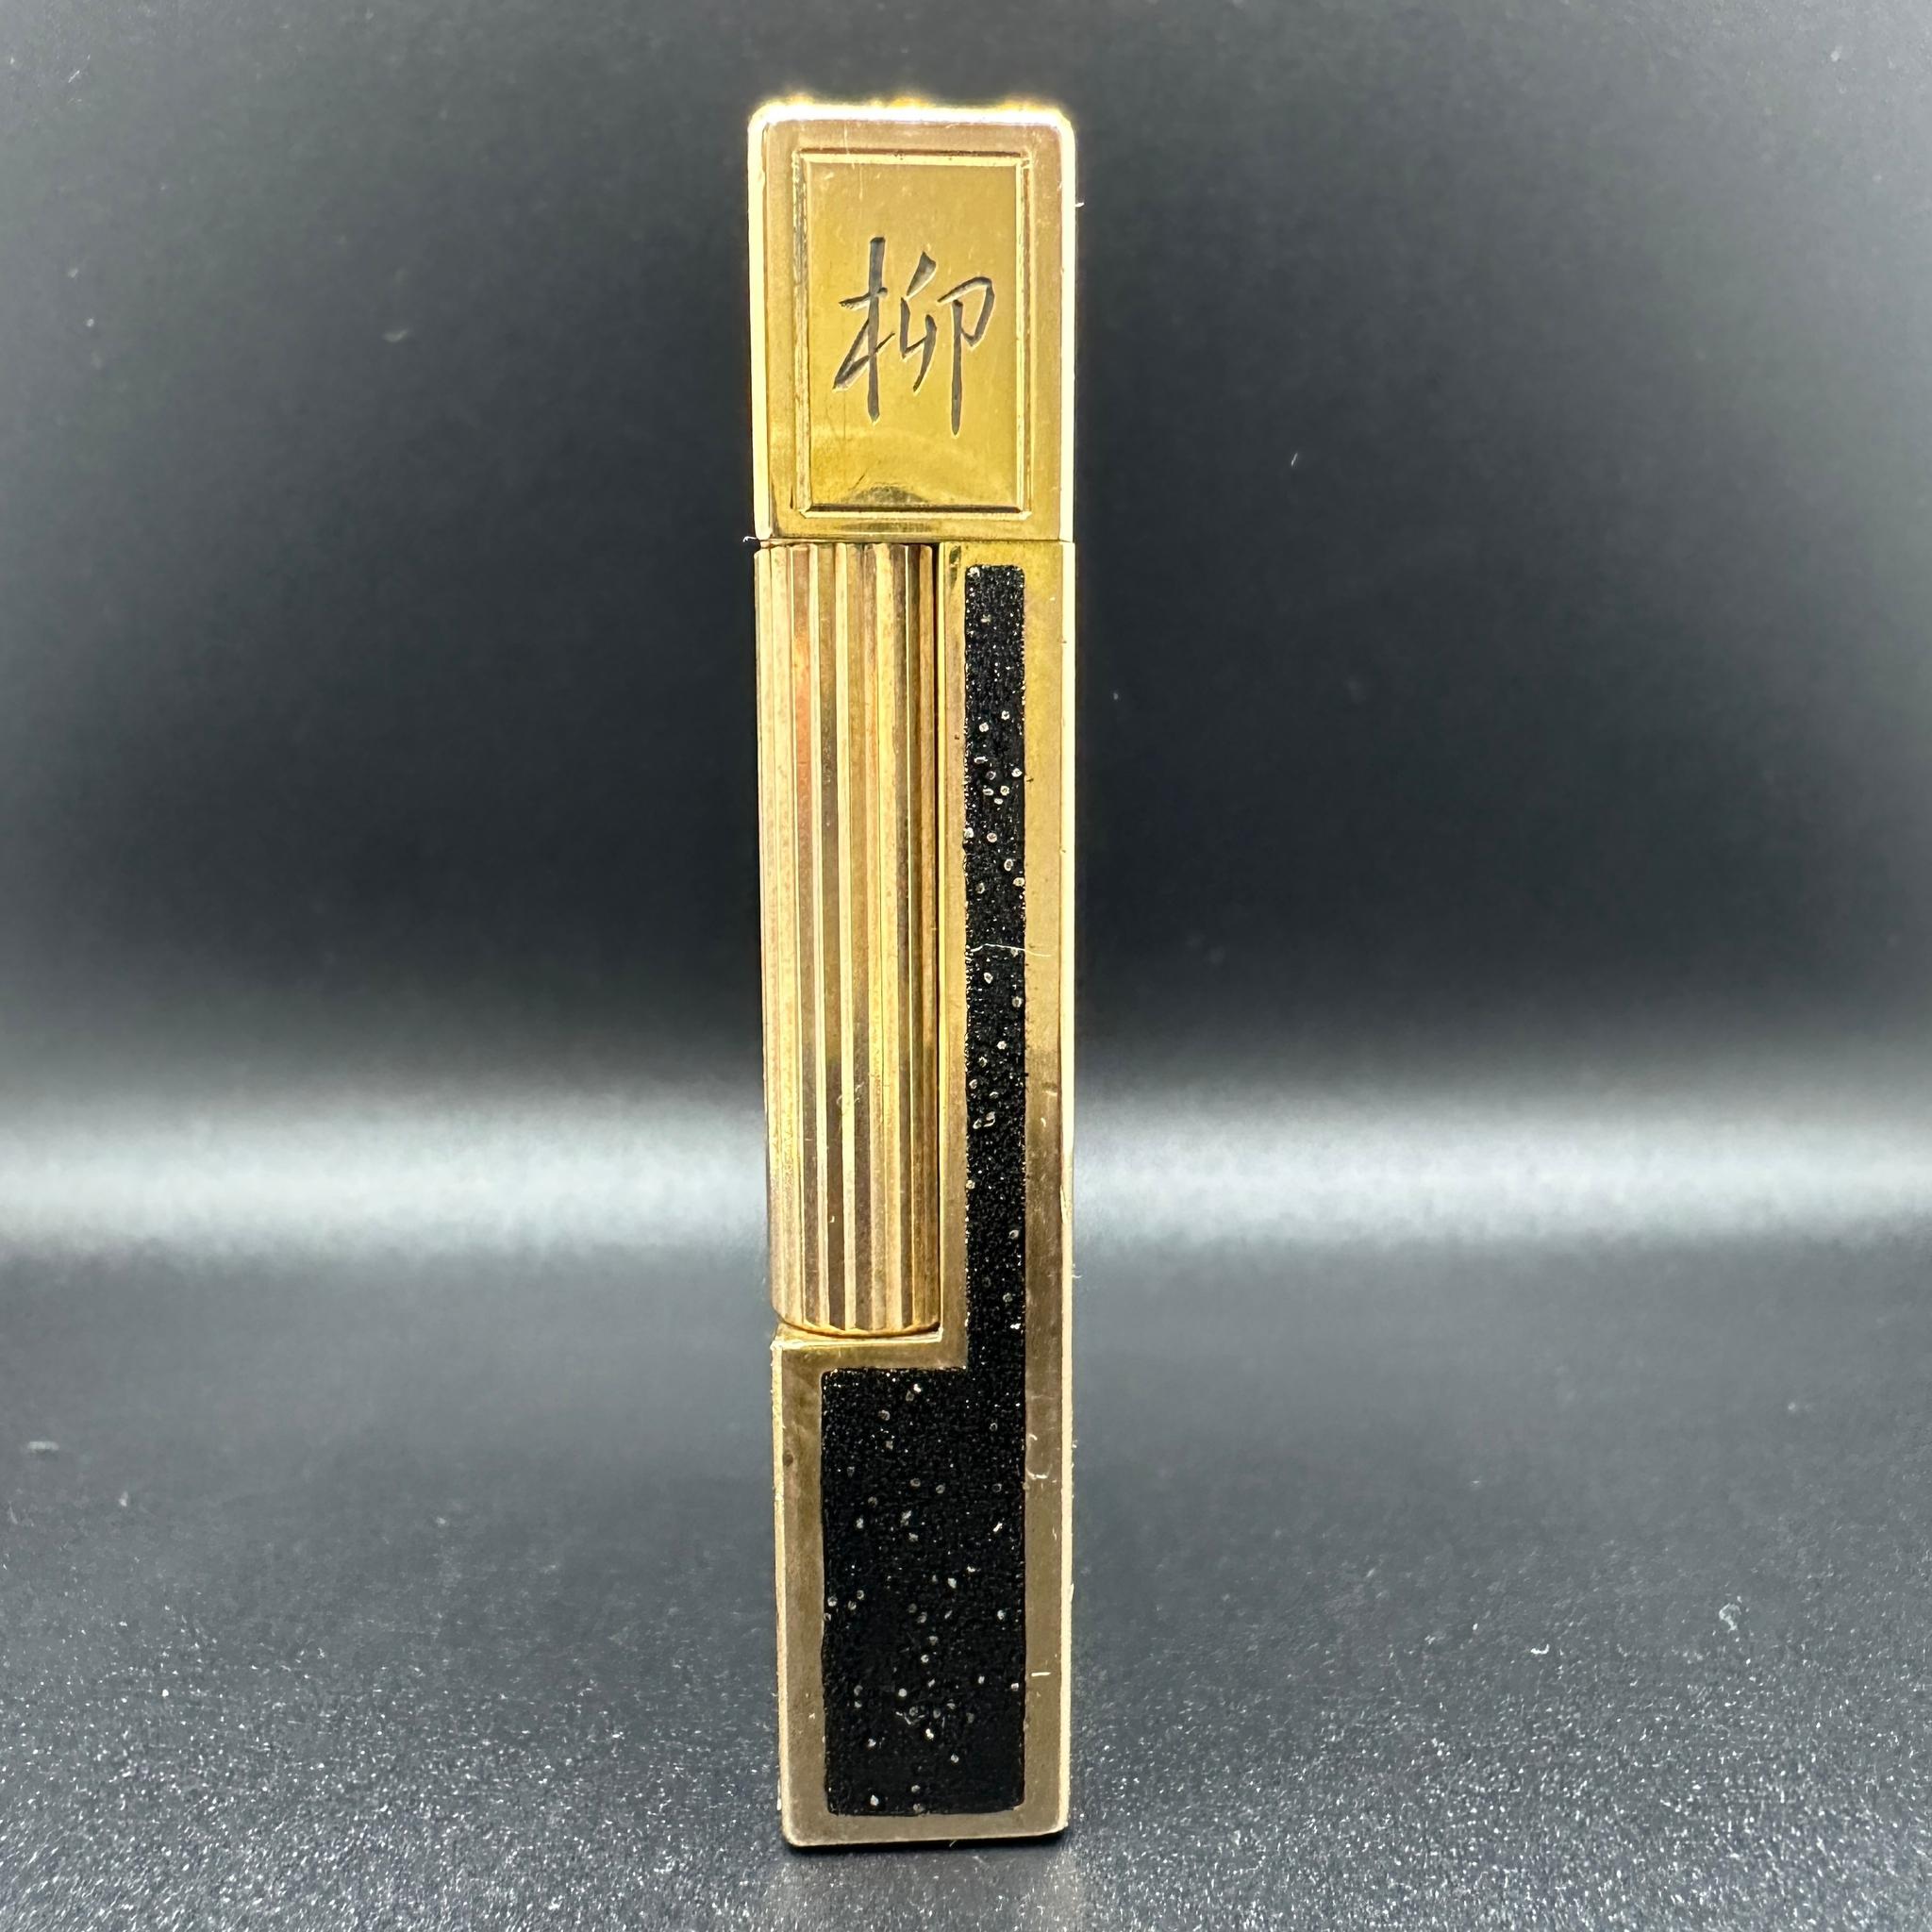 Artisan Dupont Maki-E (蒔絵, Gold Plated and Lacquer Rare Lighter